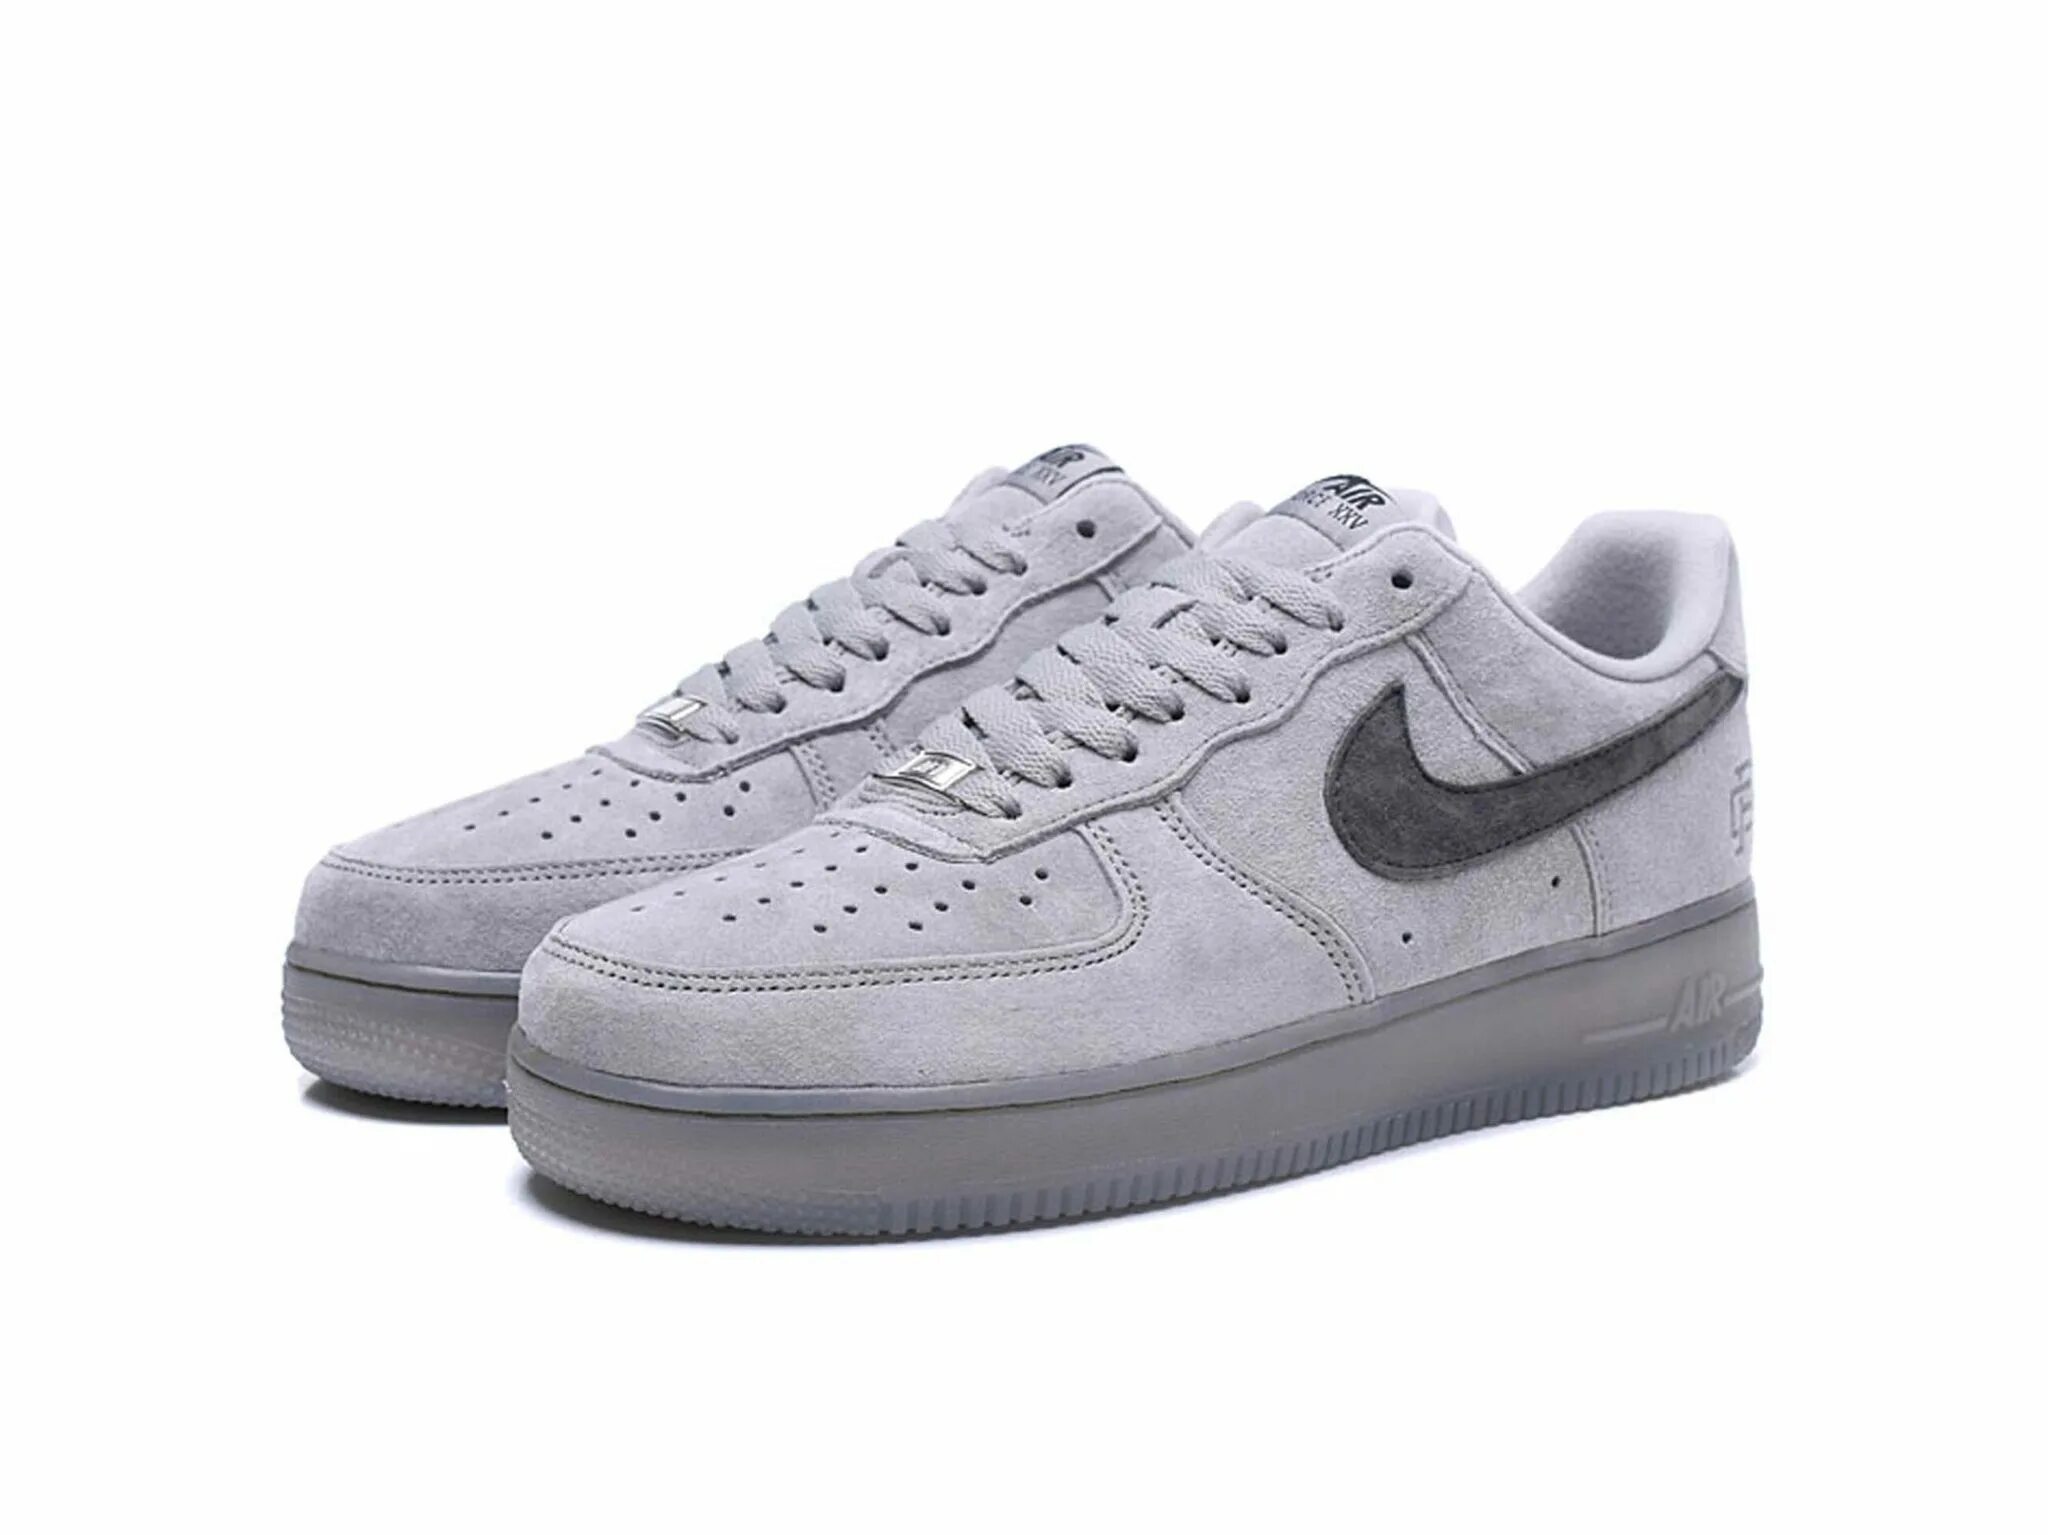 Nike Air Force 1 Low Grey x reigning Champ. Nike Air Force 1 Low Grey. Nike Air Force 1 Low reigning Champ. Nike Air Force 1 Low reigning Champ Grey. Кроссовки найк force